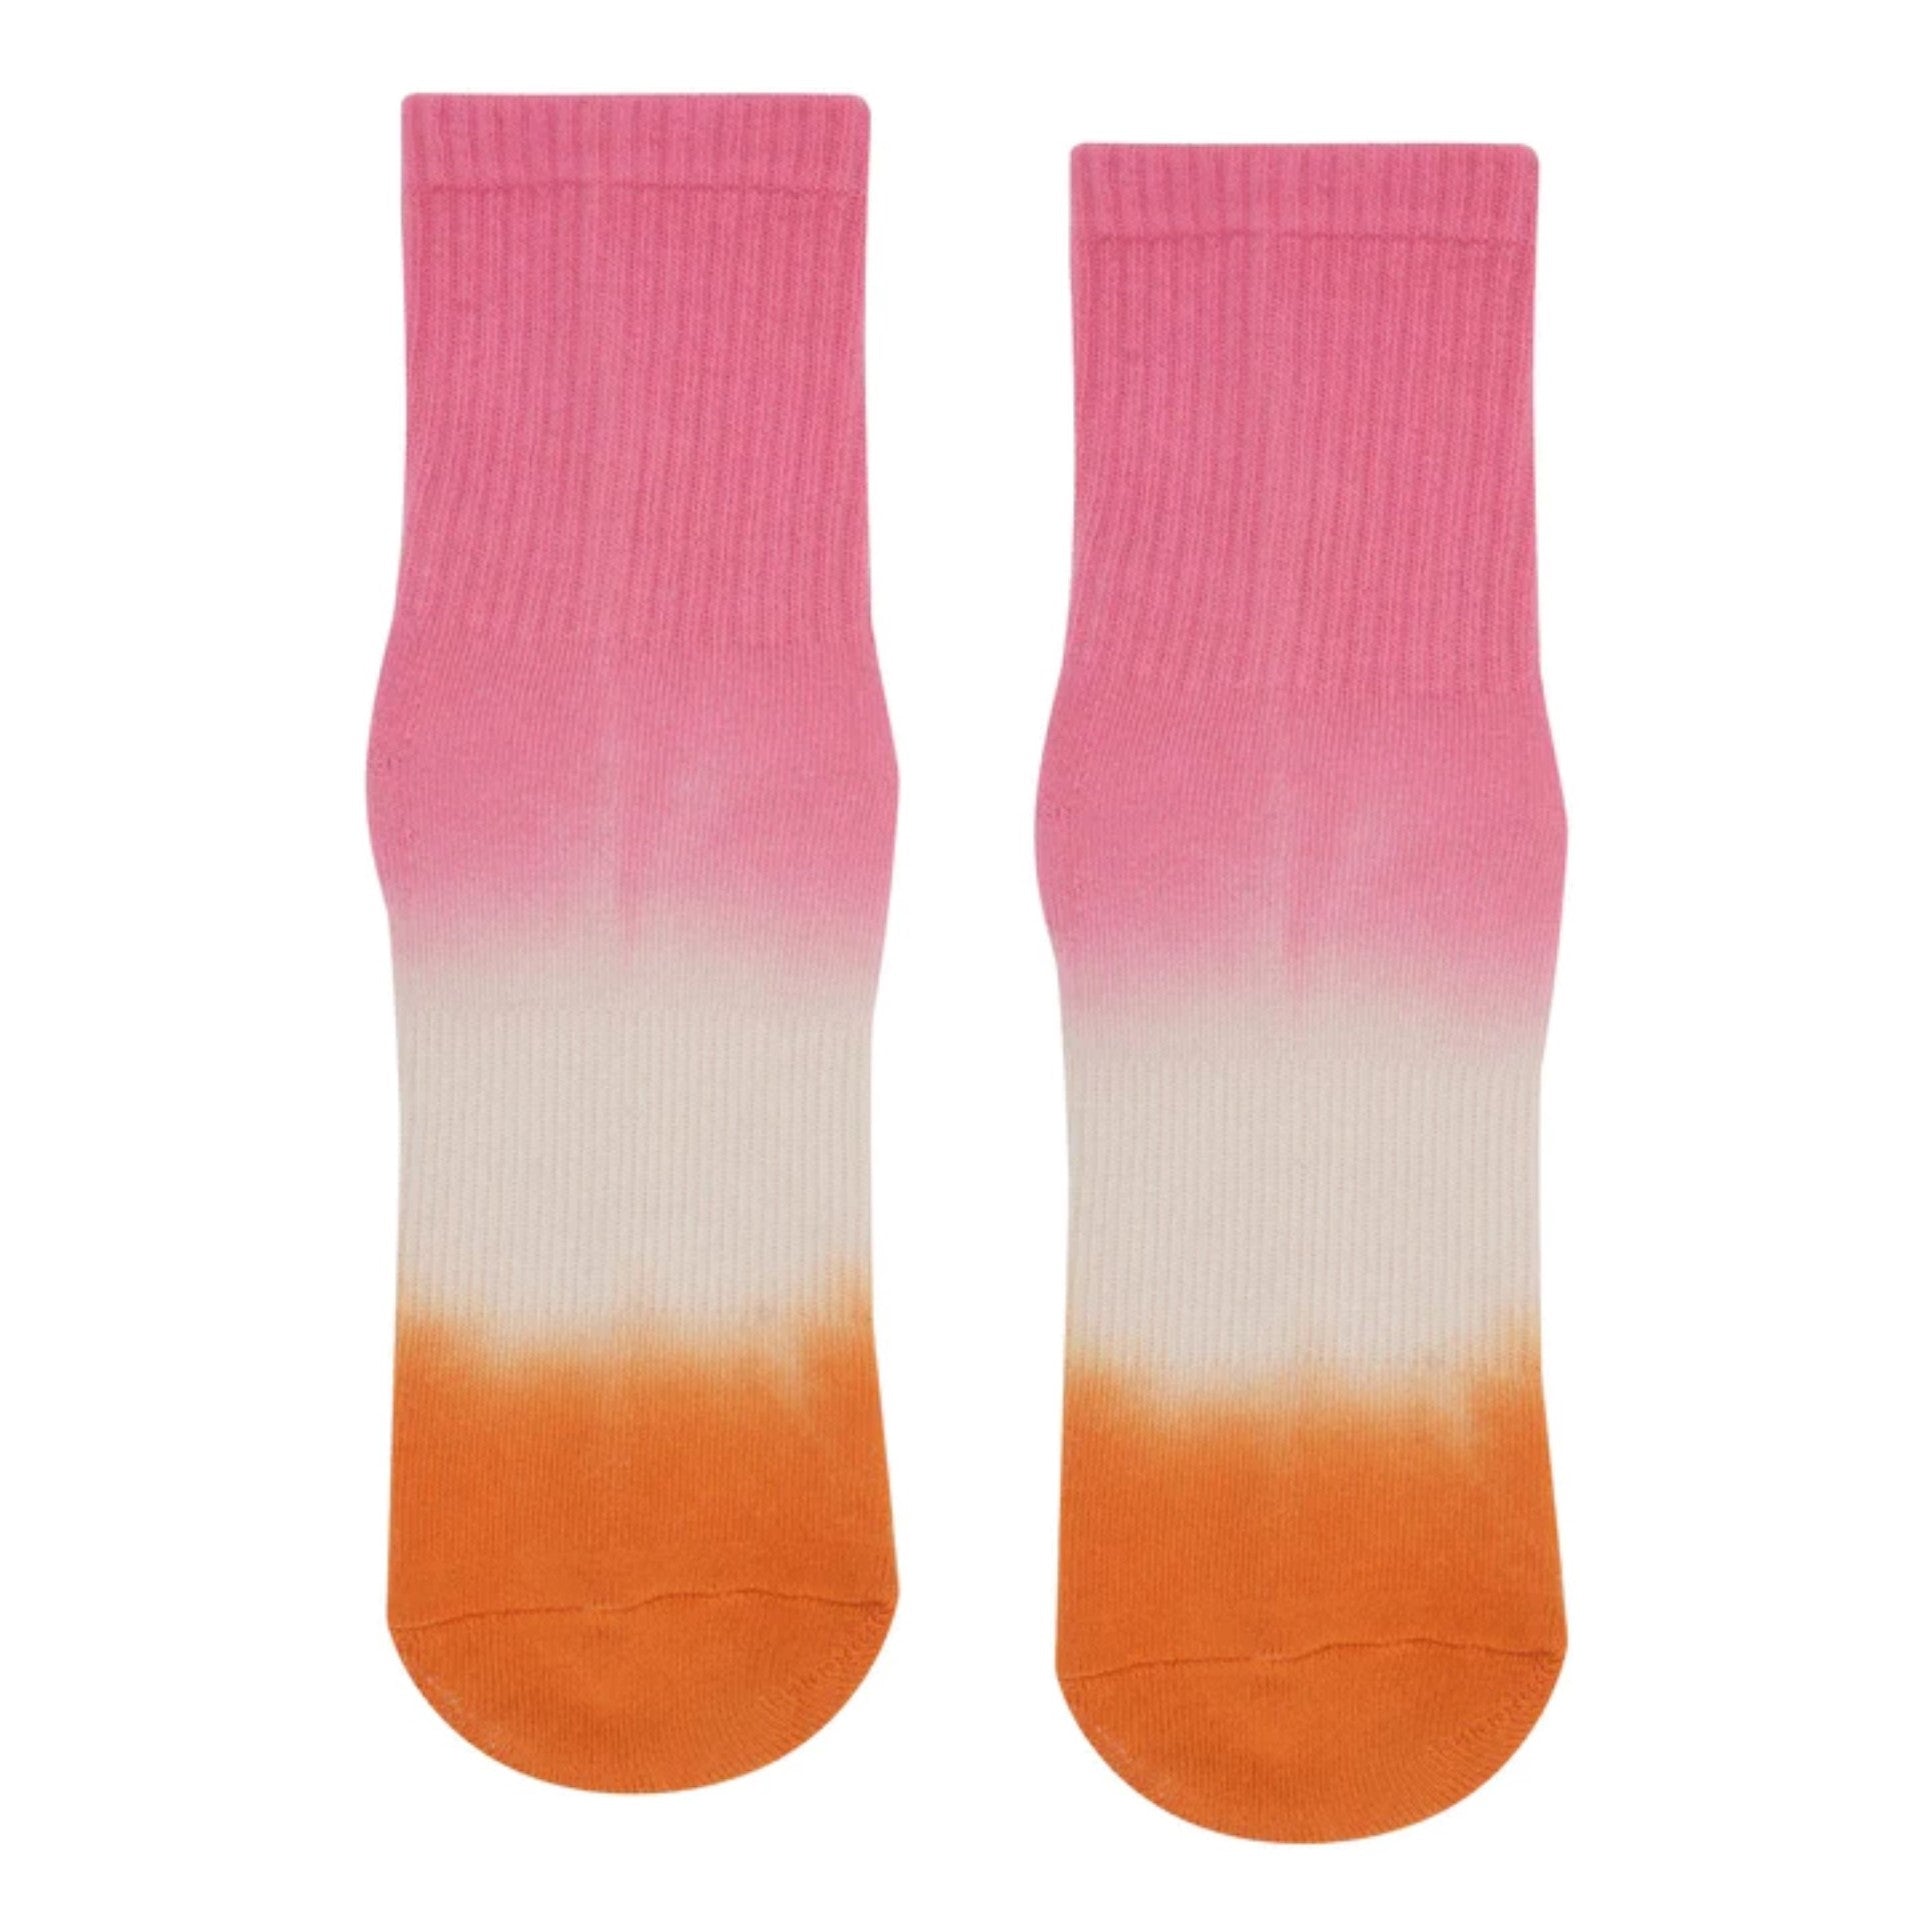 The 13 Best Sheer Socks To Step Up Your Spring Shoe Rotation - Brit + Co